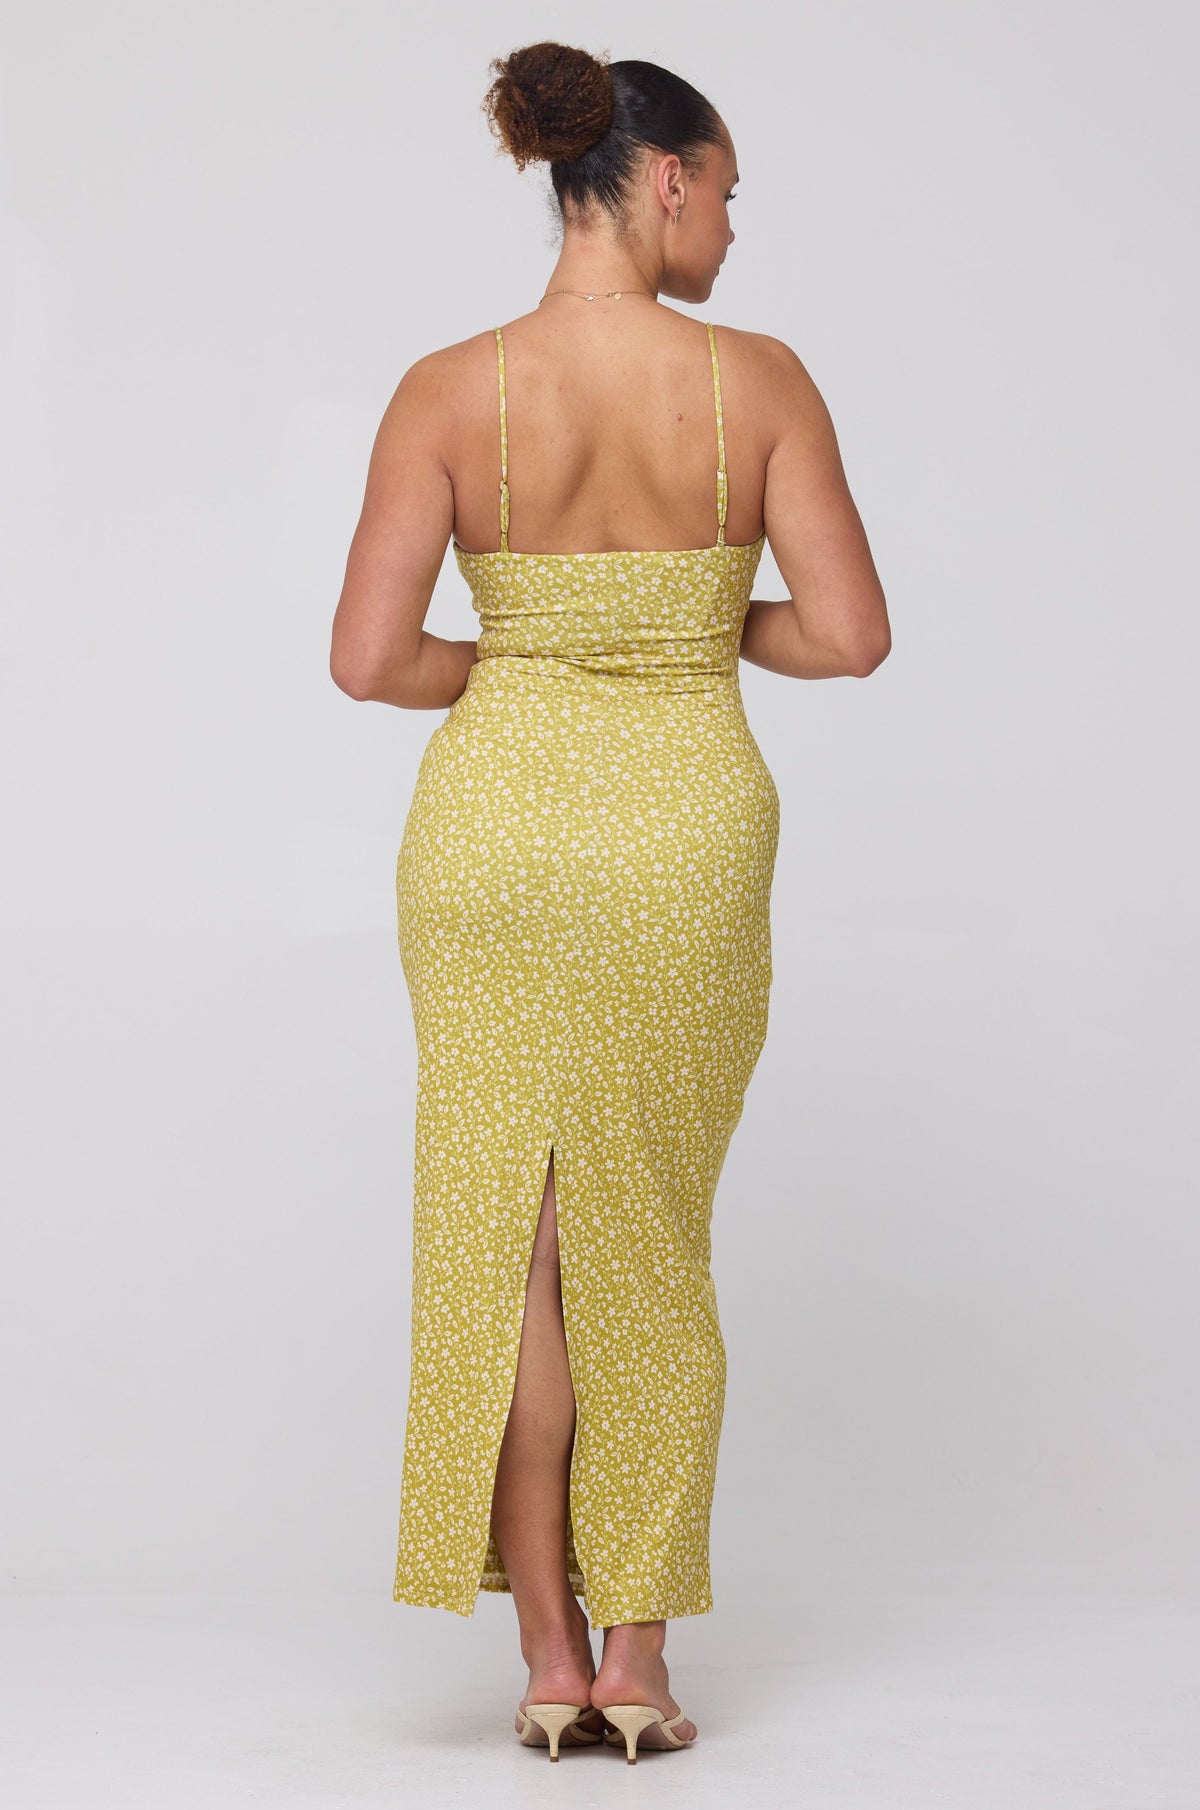 This is an image of Summer Midi in Newport - RESA featuring a model wearing the dress